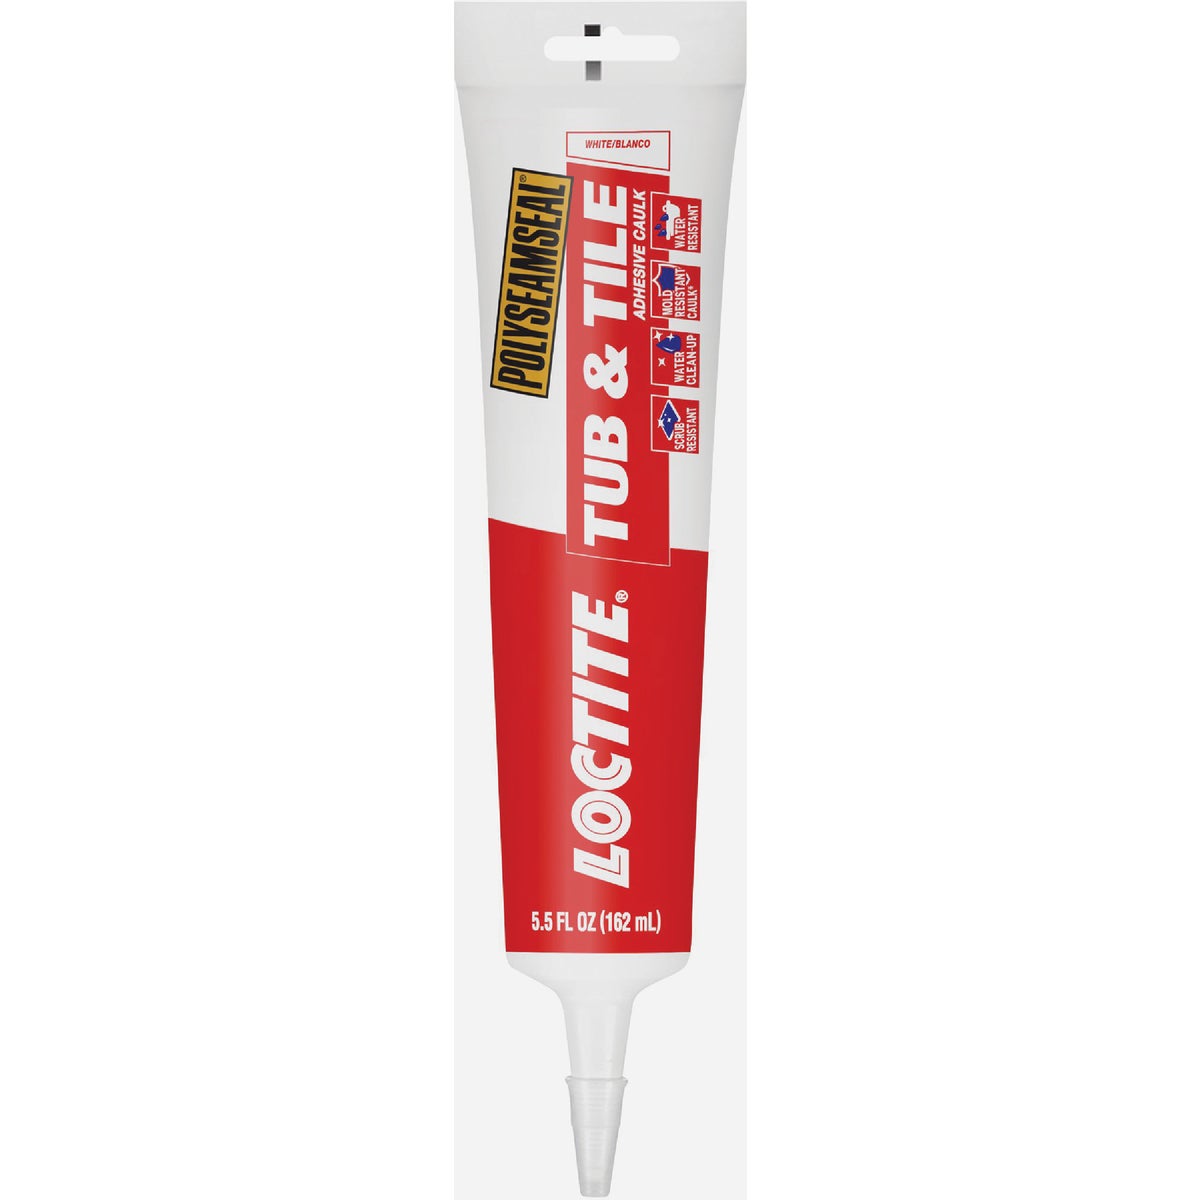 Item 790673, Loctite Polyseamseal Tub &amp; Tile is formulated for sealing projects in 